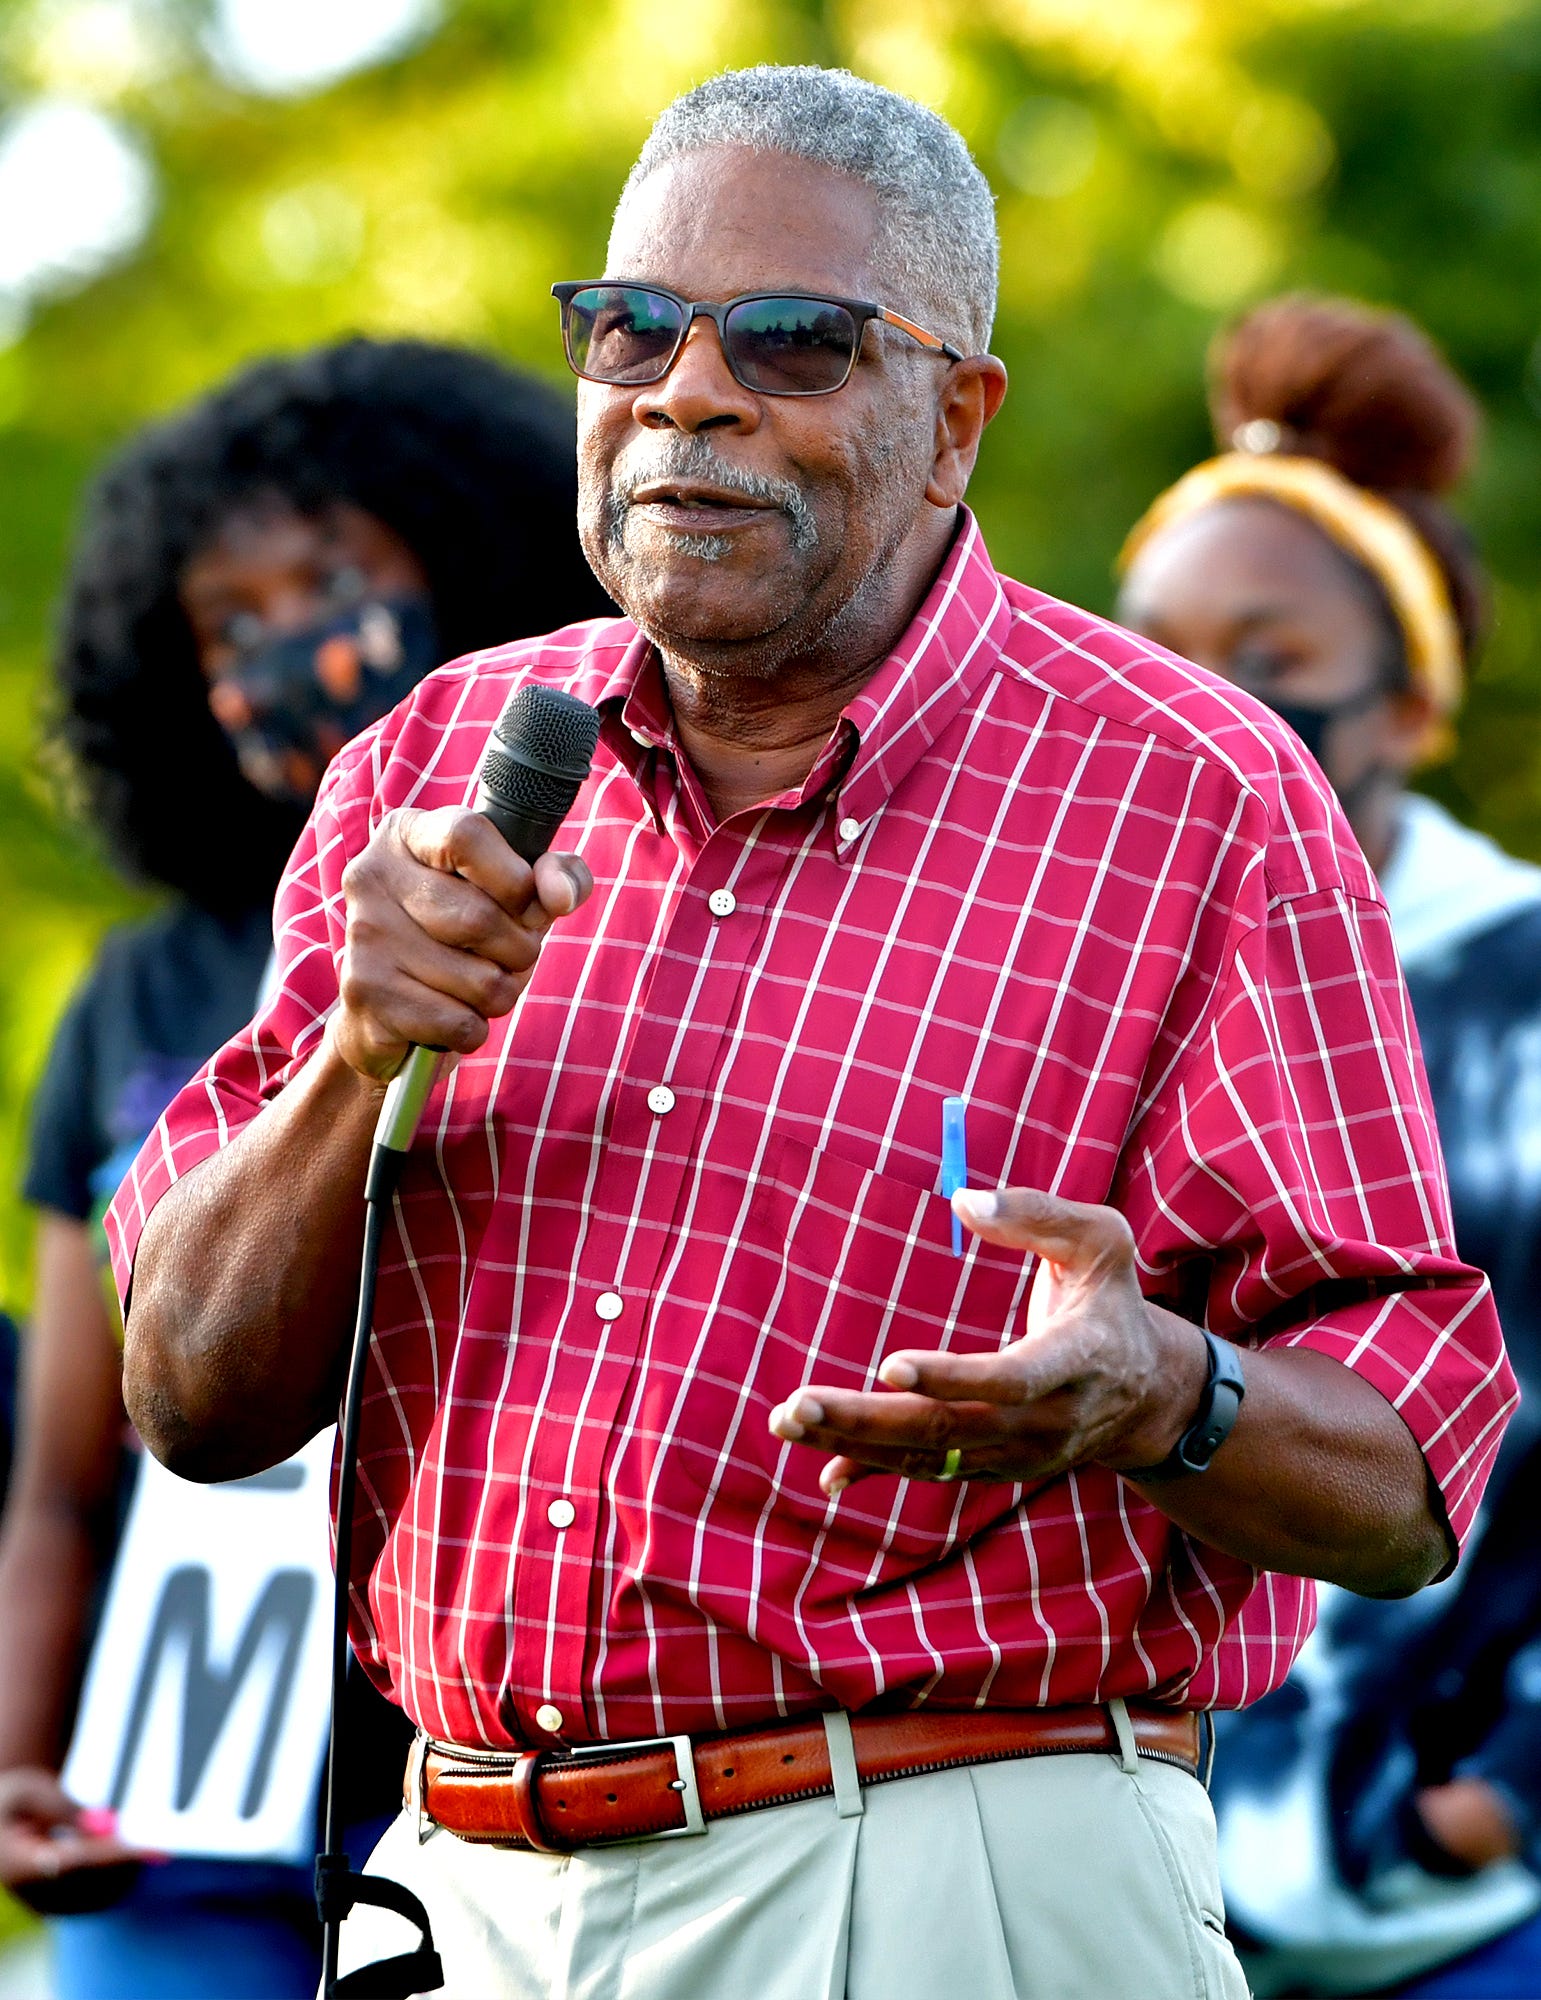 Former Central York School Board Director Daniel Elby speaks during a rally outside the Central York School District Administration offices before a school board meeting there Monday, Sept. 20, 2021. He was on school board in the district in the 1980s. The rally was in opposition to a banned resource list instituted by the district, which demonstrators say targets minority authors. District officials added formal discussion of the ban to Monday's agenda. Bill Kalina photo